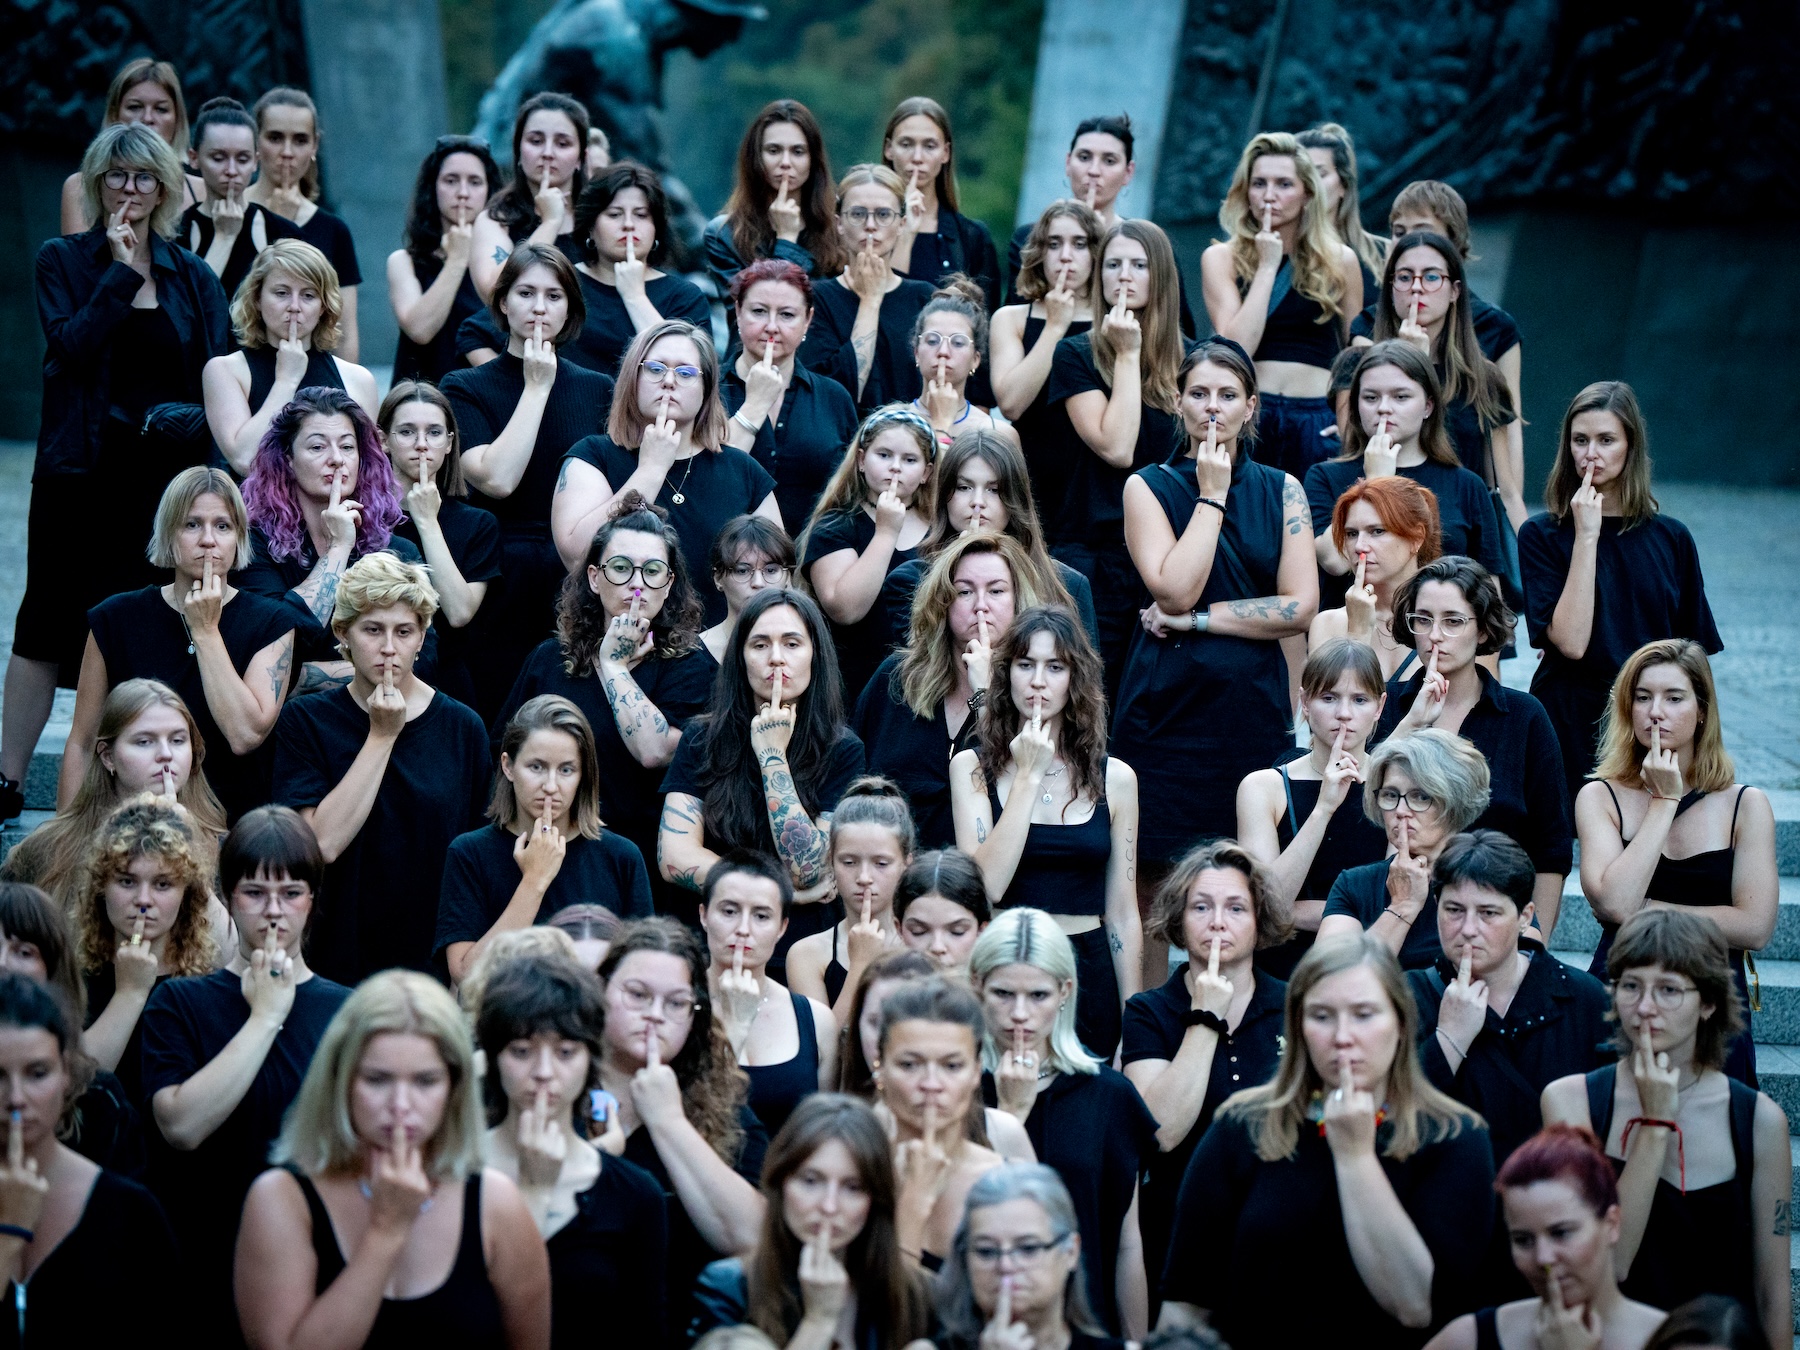 A group of women wearing black holding their middle fingers over their mouths in protest